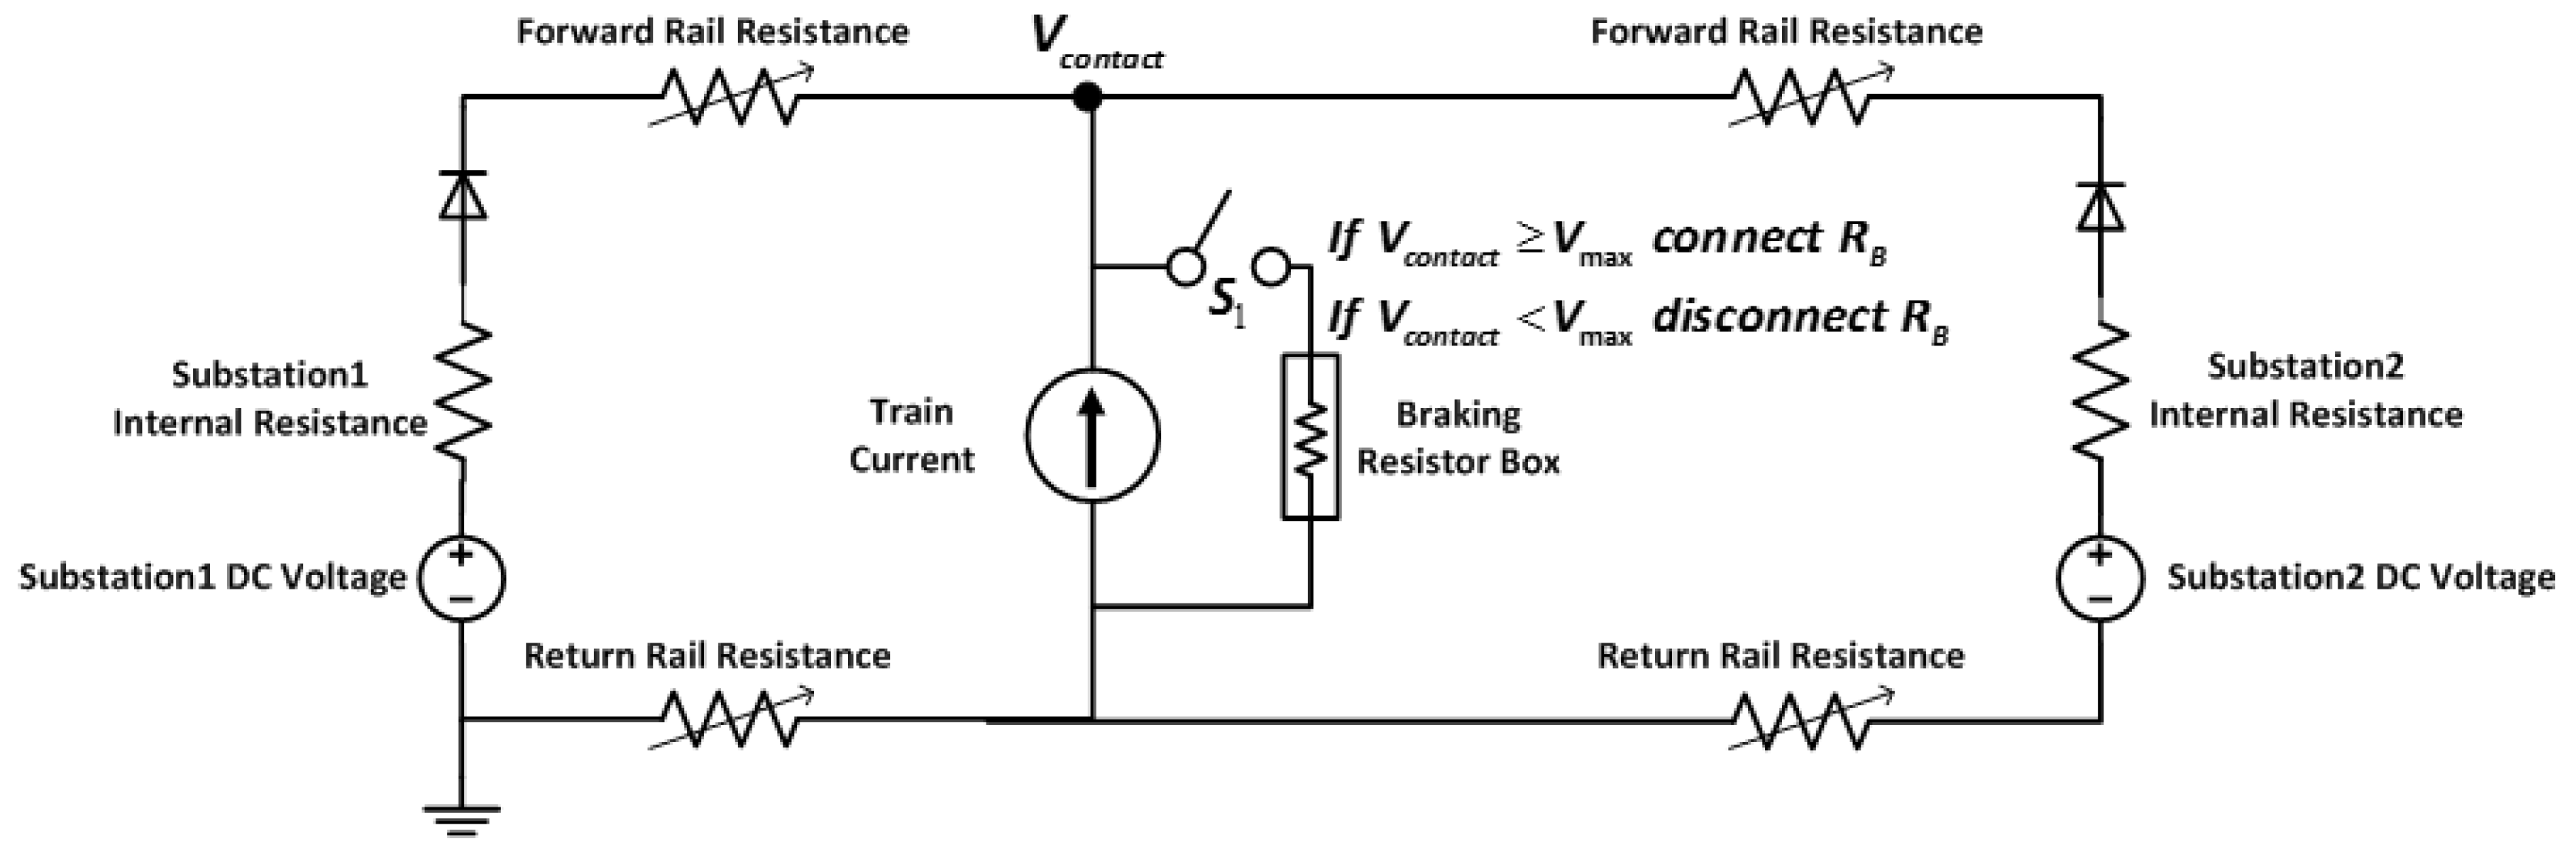 Energies Free Full Text Electrical Modelling Of A Dc Railway System With Multiple Trains Html